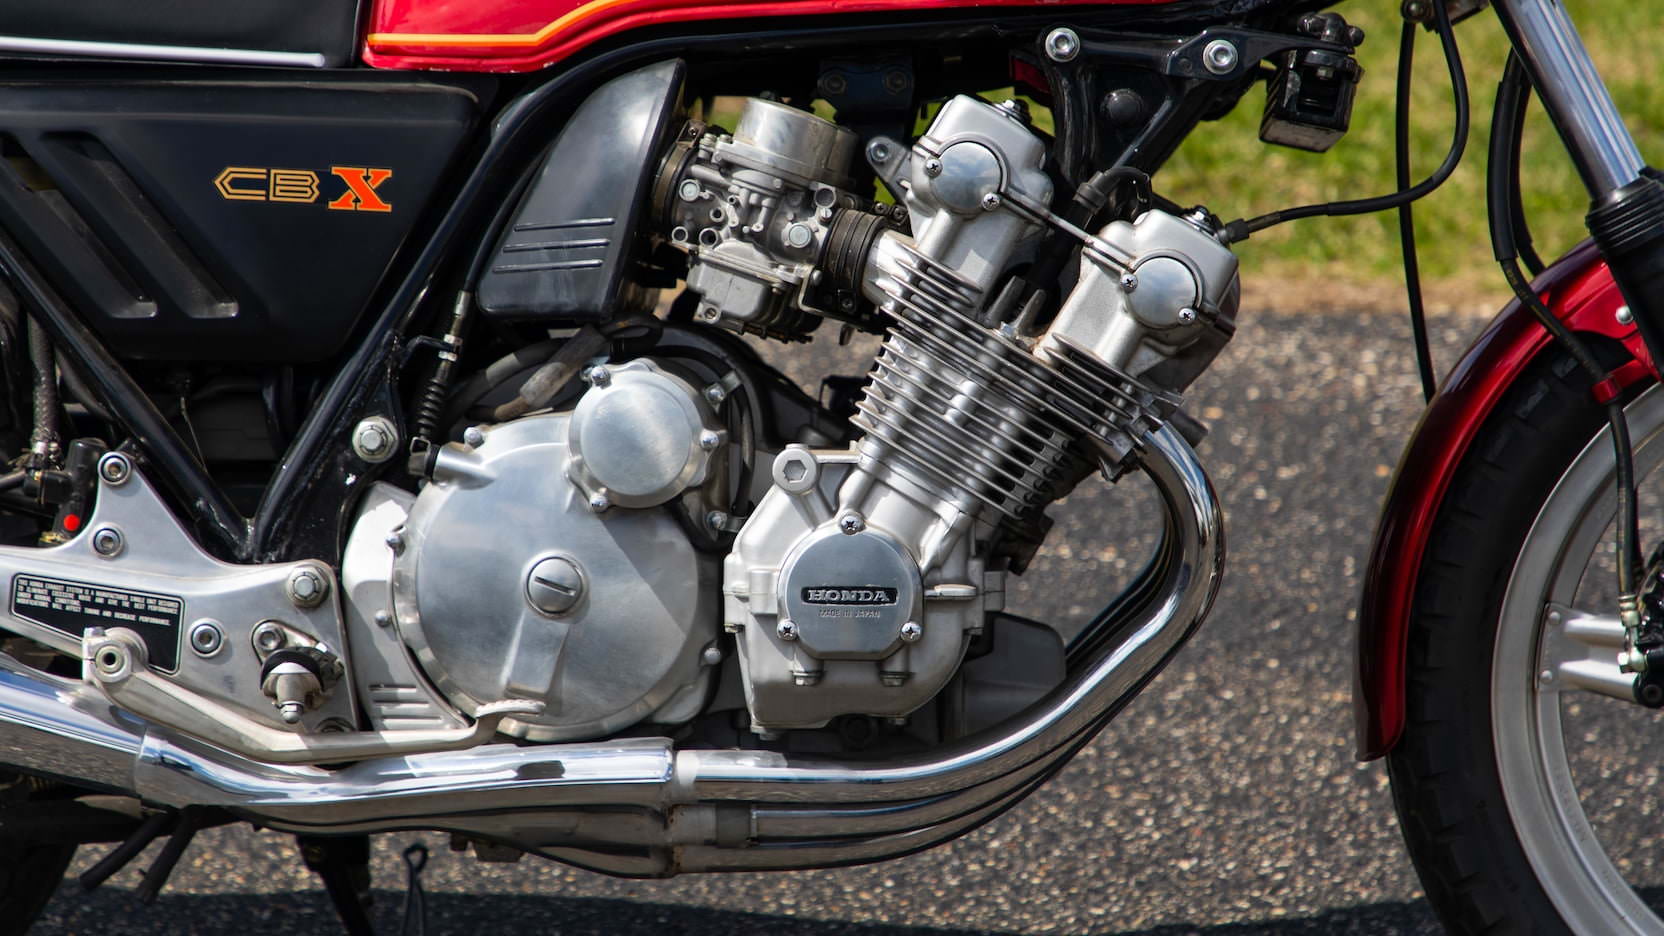 Insane Build: Two 6-cylinder motorcycle engines came together to power this  mad sounding V12 Honda CBX (Video Included)